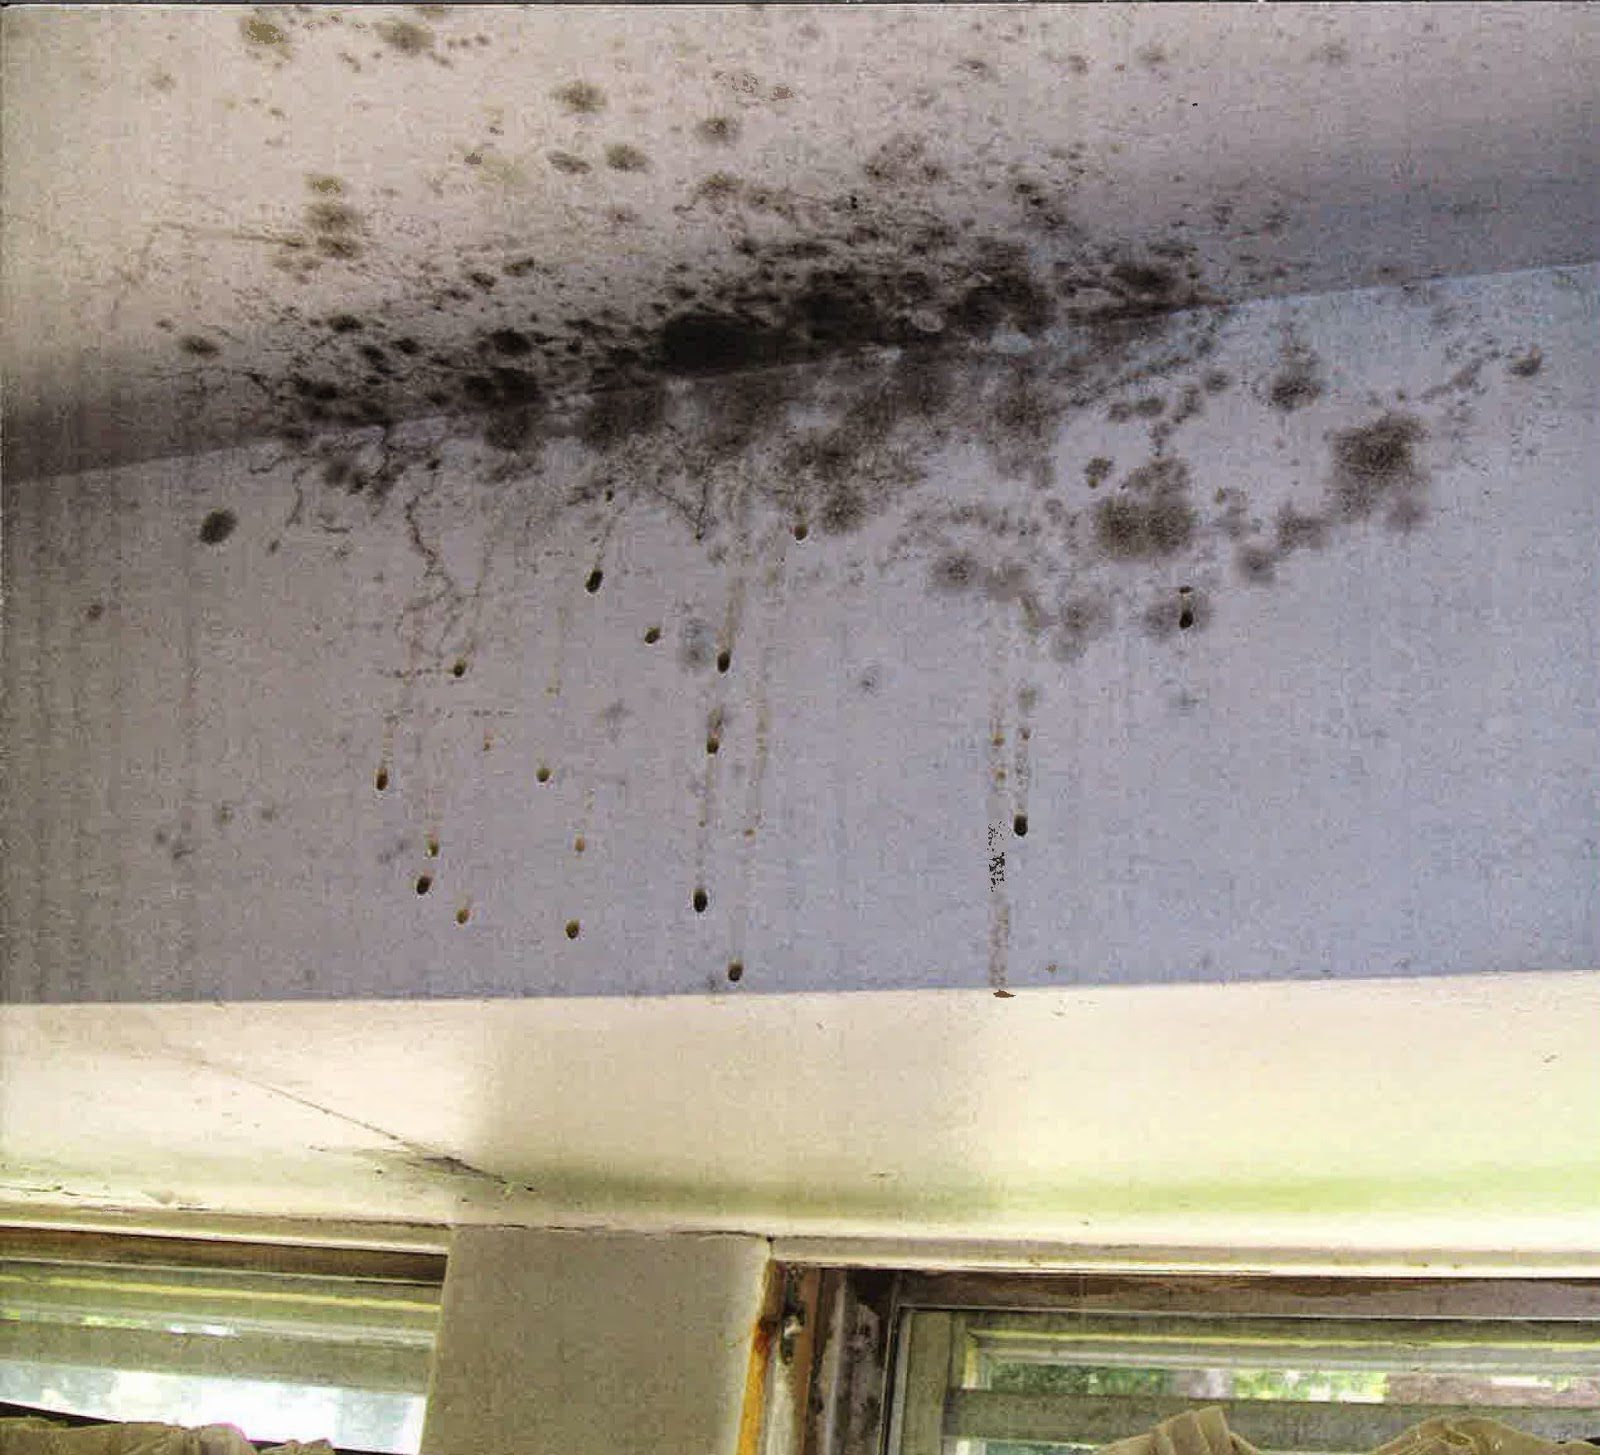 How To Get Rid Of The Mold In Your Apartment » GeekedOutHome